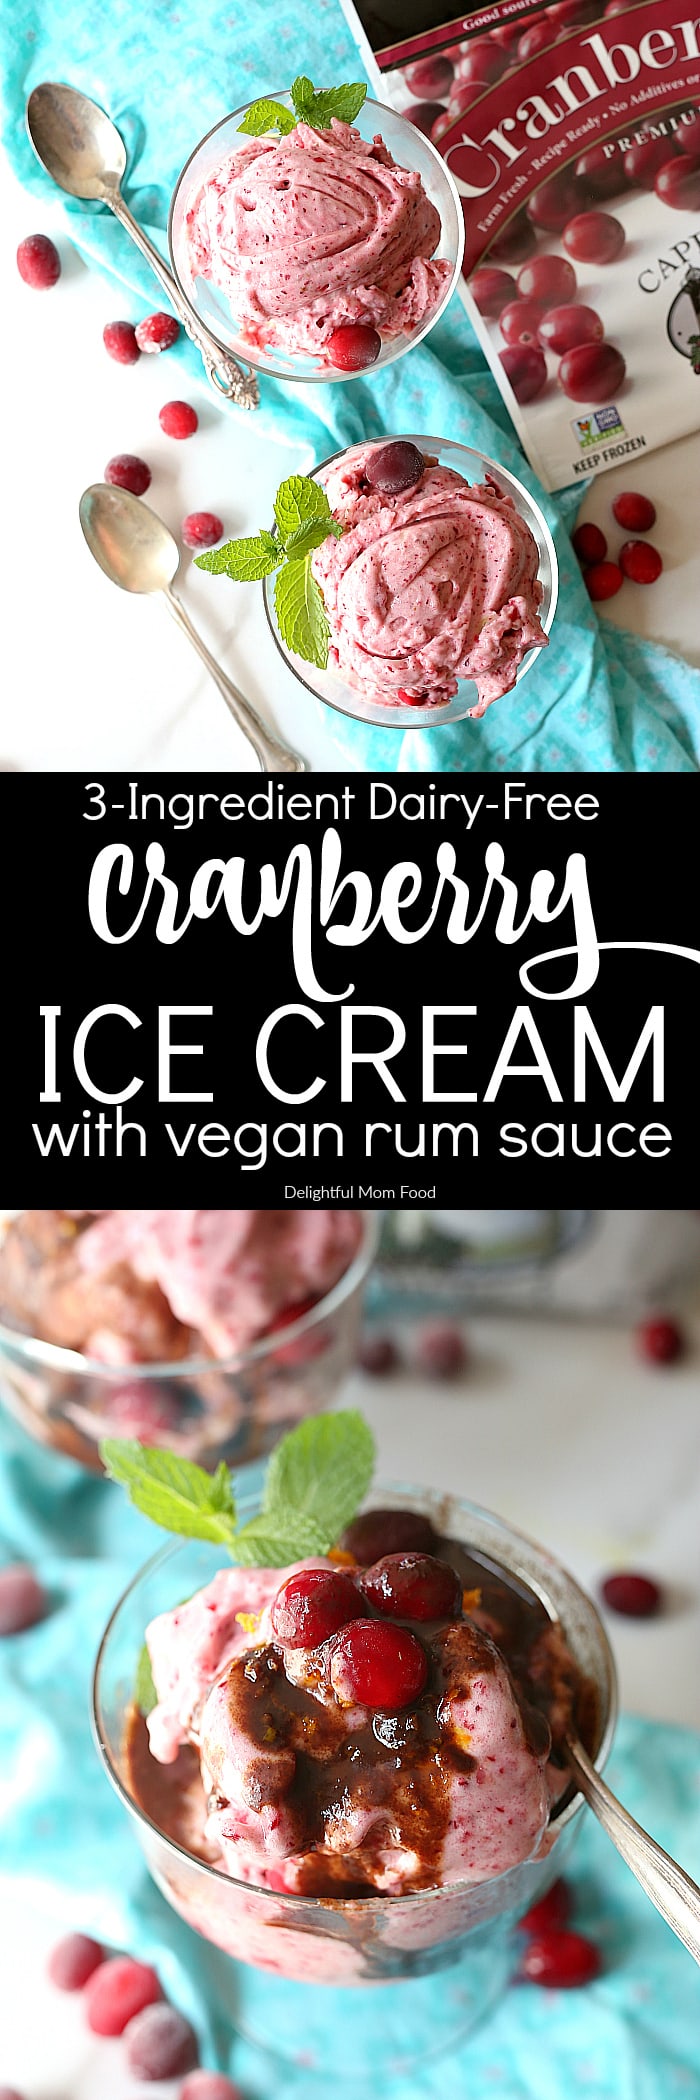 This healthy cranberry ice cream is sure to soothe a sweet tooth craving! The berry’s bittersweet taste mixed with sweet frozen bananas and topped with (vegan) butter rum chocolate sauce is a healthier way to enjoy a frozen treat! #icecream #frozen #dessert #treats #fruit #cranberry #recipe #banana #capecodselect #frozencranberries #cranberriesforallseasons | Recipe at delightfulmomfood.com